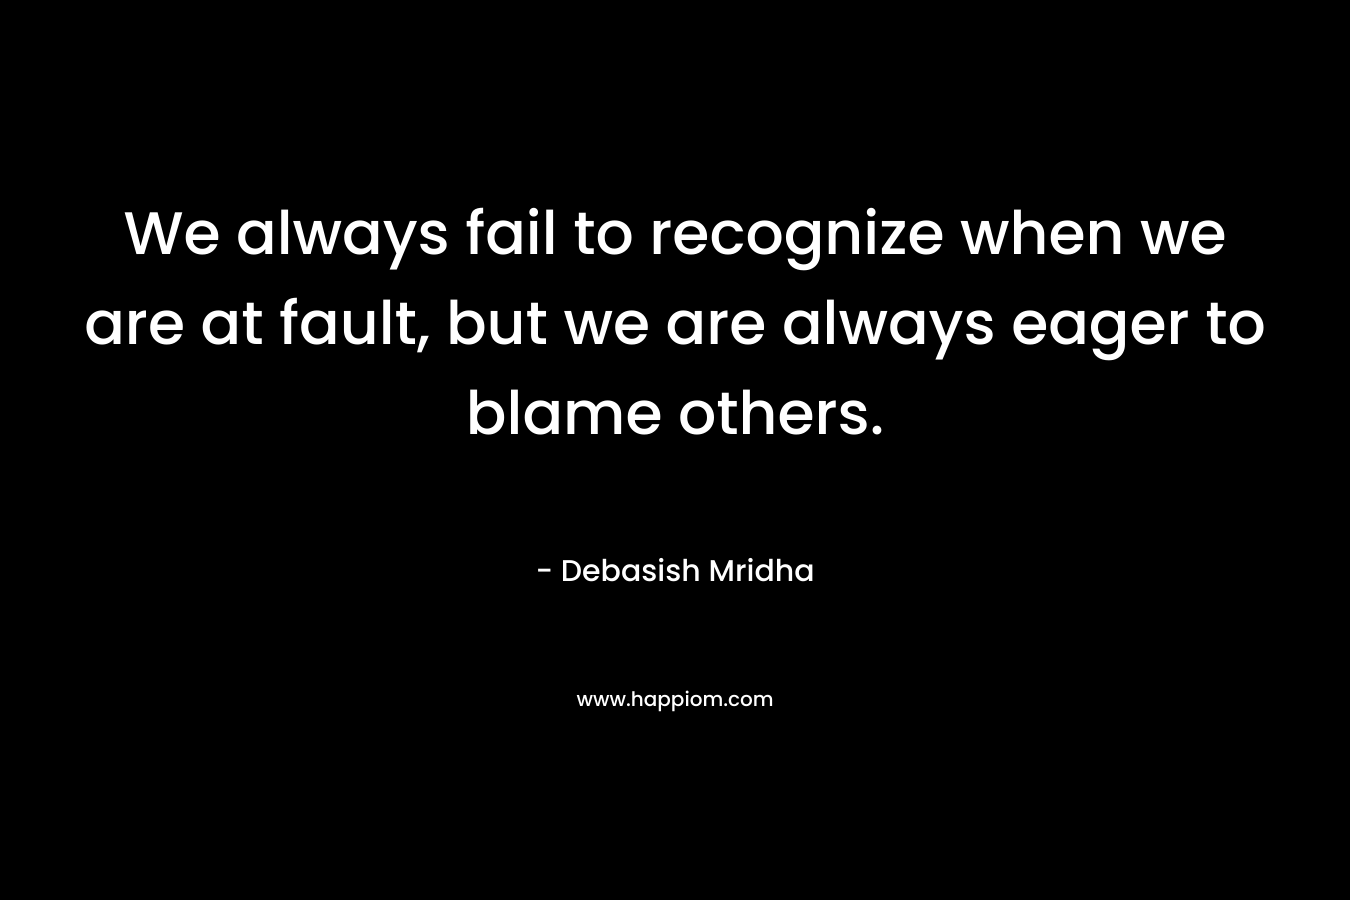 We always fail to recognize when we are at fault, but we are always eager to blame others.